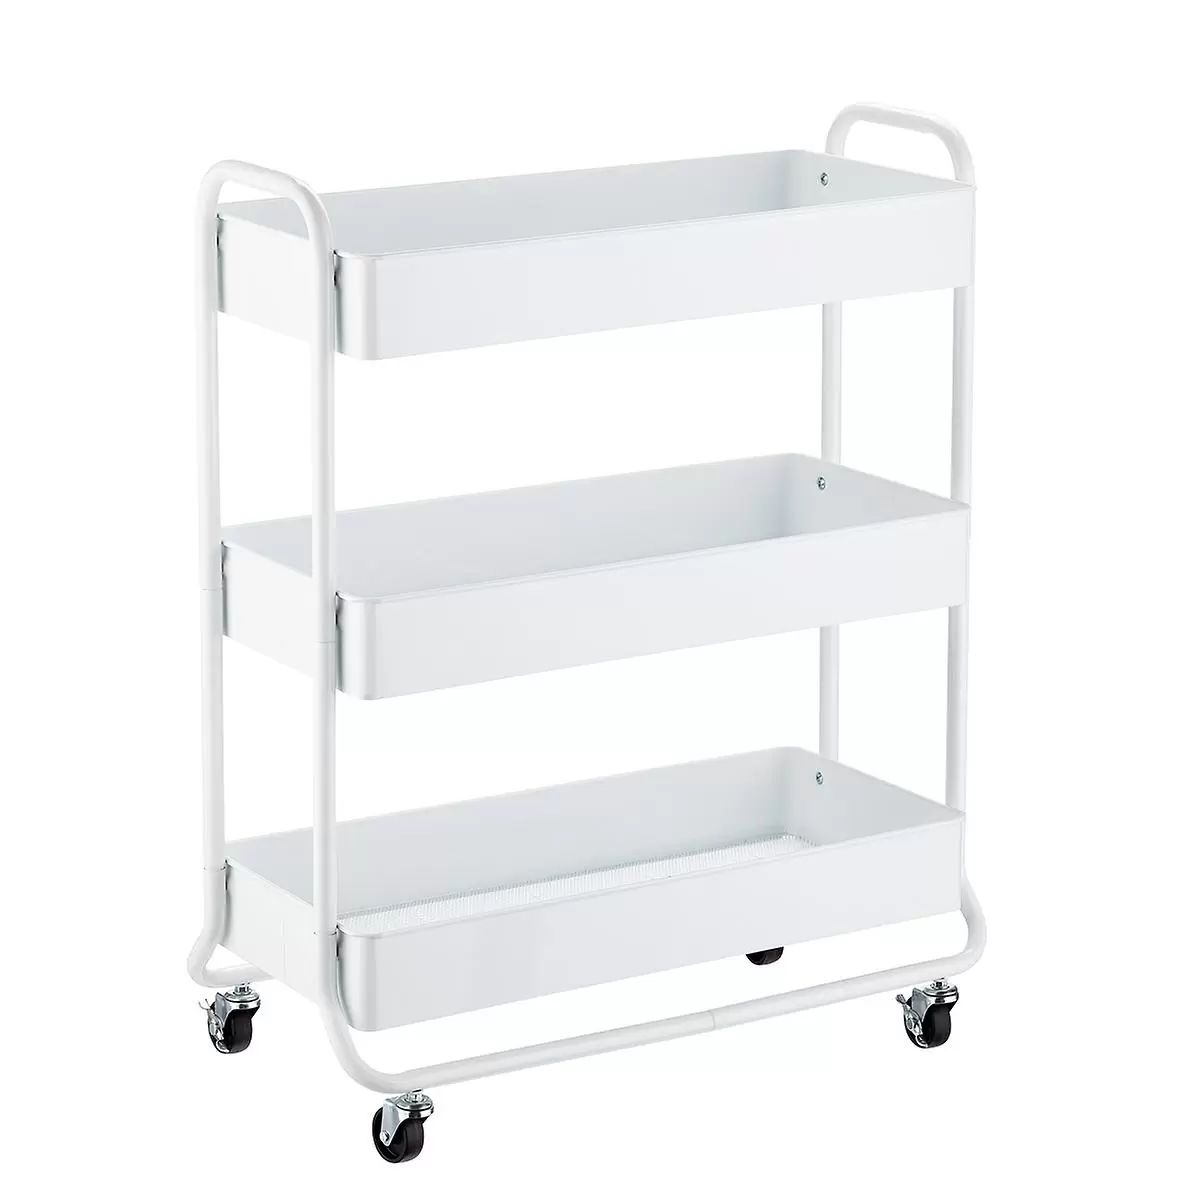 Large 3-Tier Rolling Cart | The Container Store